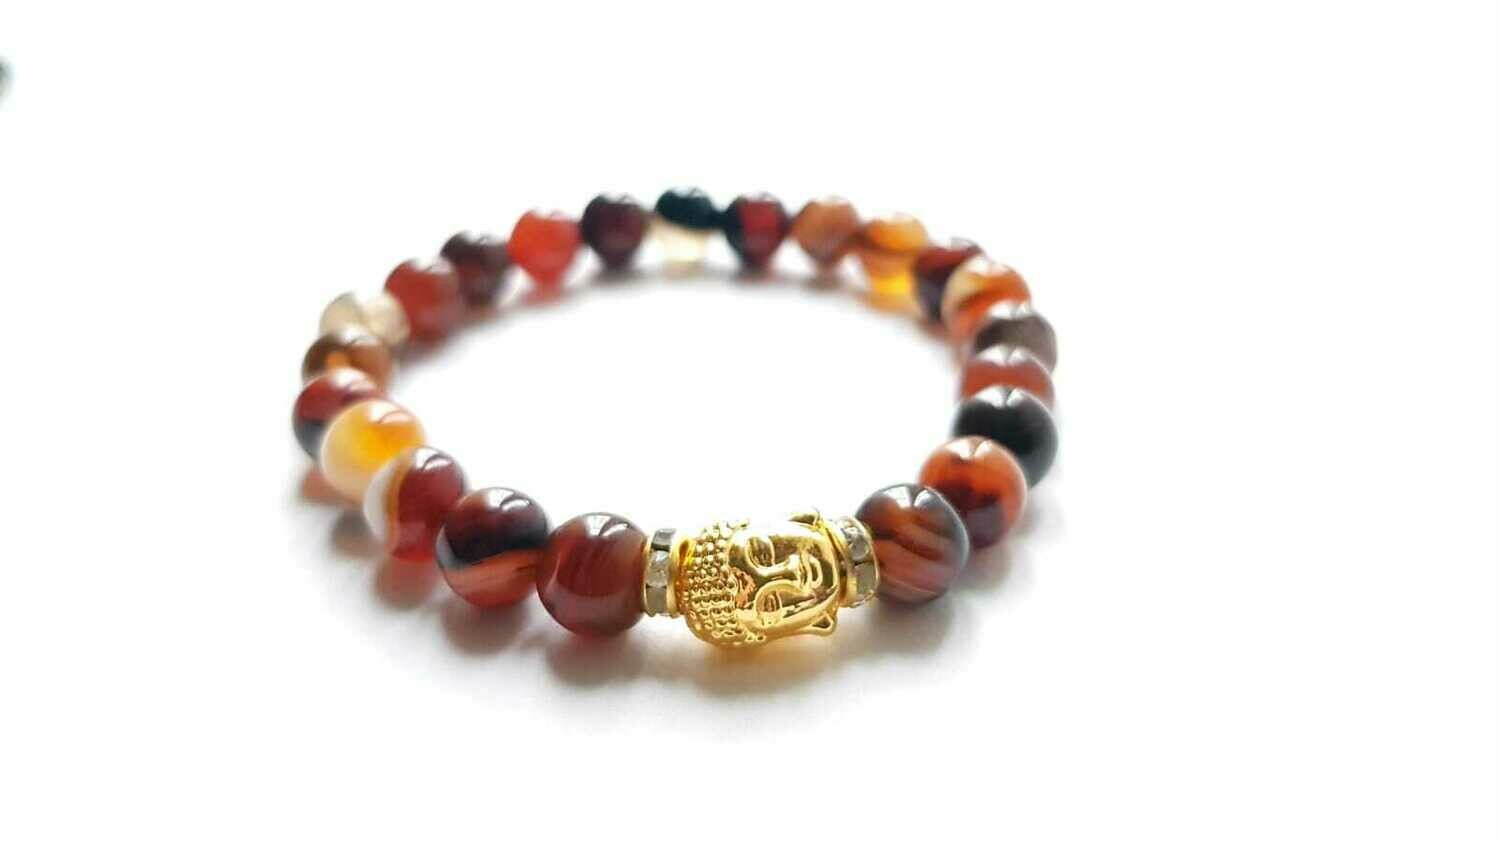 Banded agate bracelet with gold plated Buddha charm